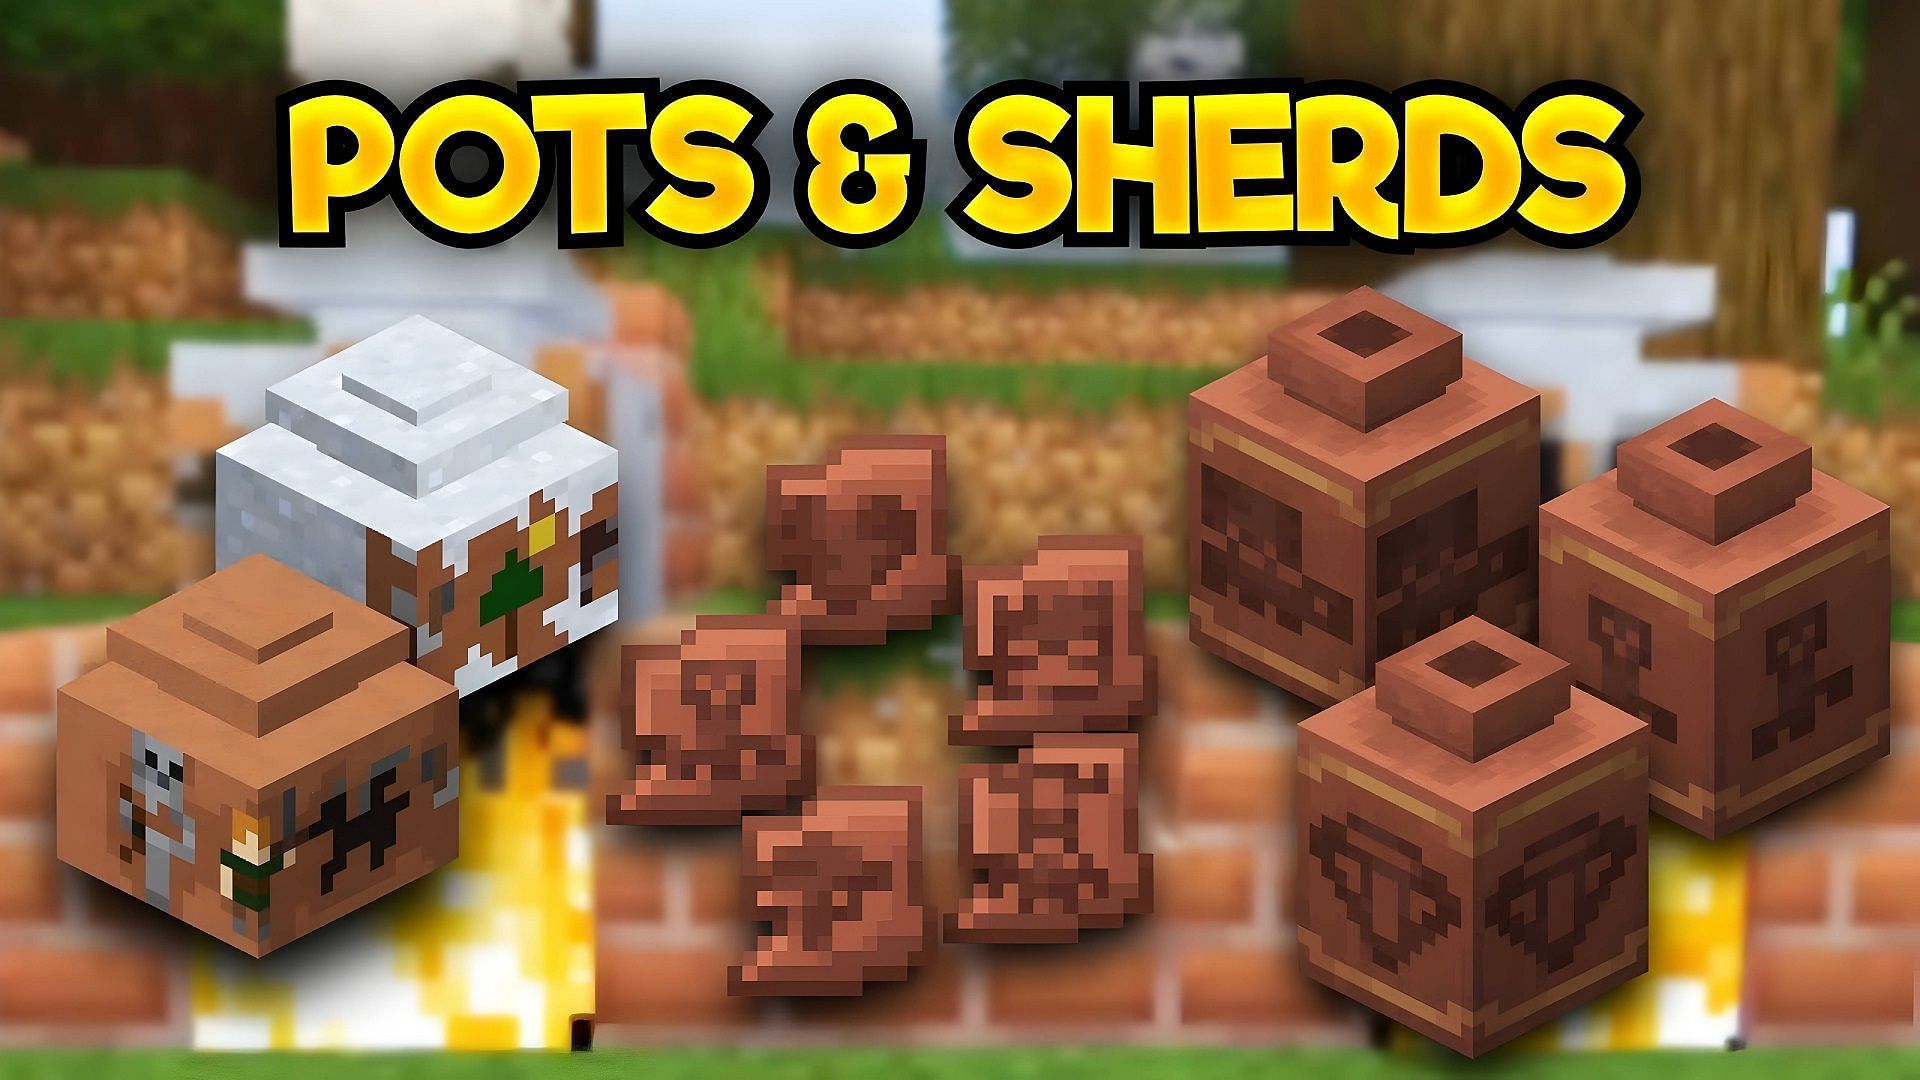 Minecraft 1.20 adds pottery sherds and decorated parts for its archeology gameplay (Image via Ibxtoycat/YouTube)